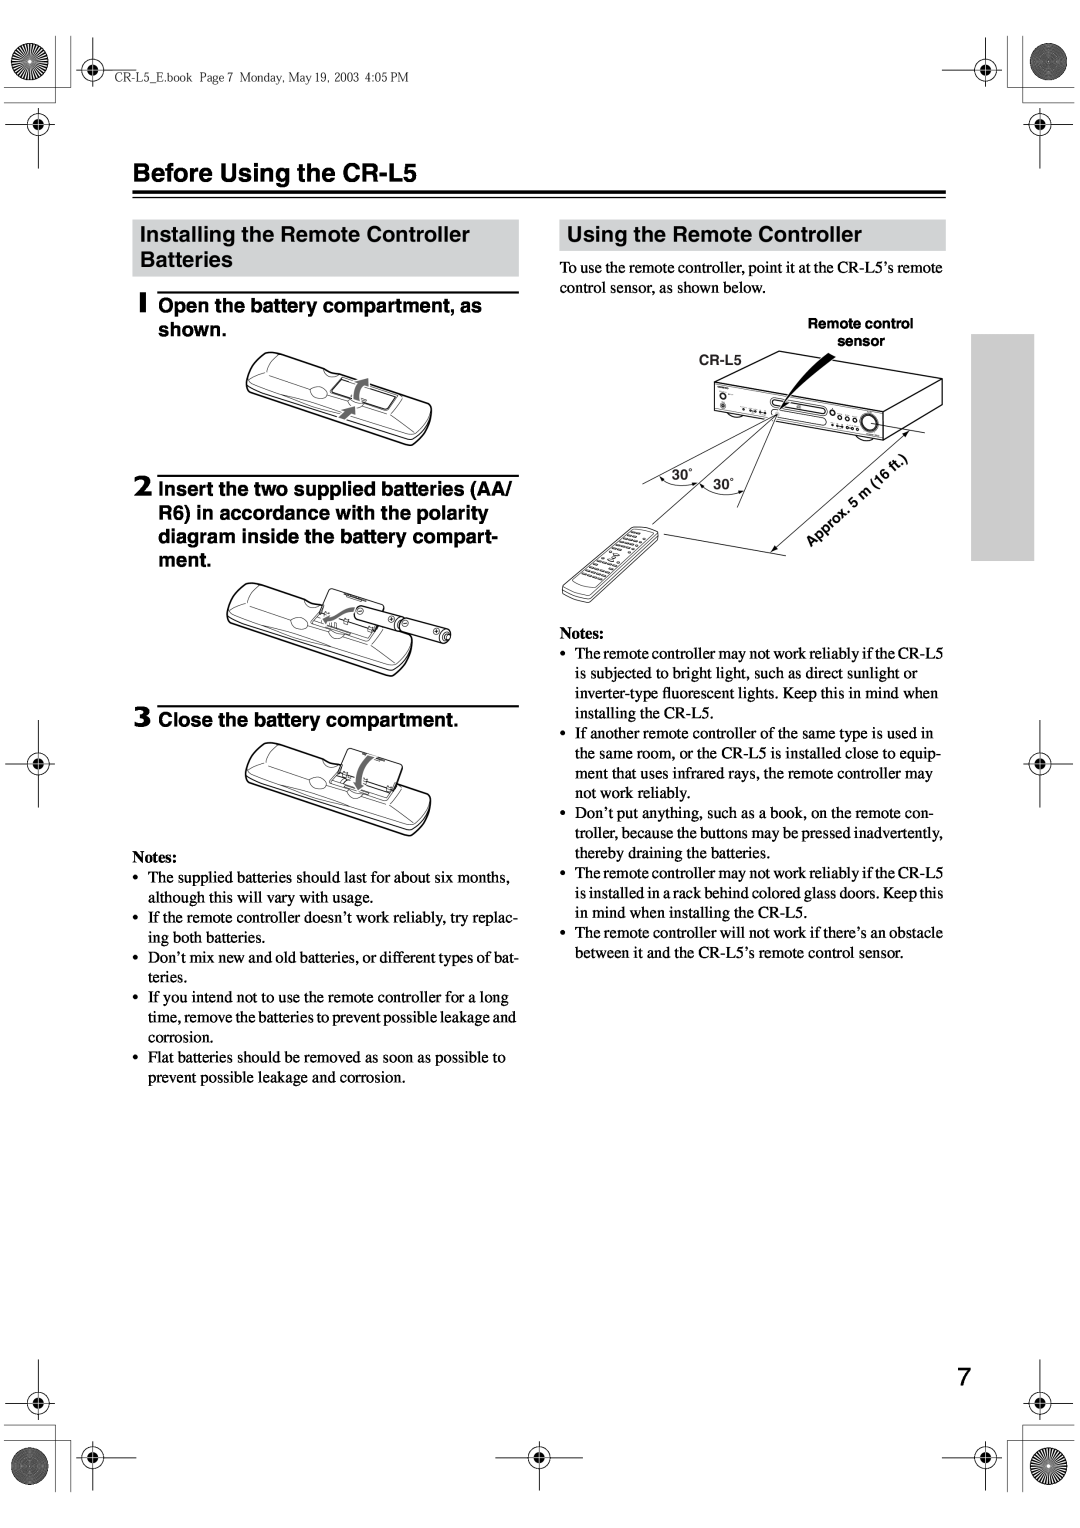 Onkyo instruction manual Before Using the CR-L5, Installing the Remote Controller Batteries, Using the Remote Controller 